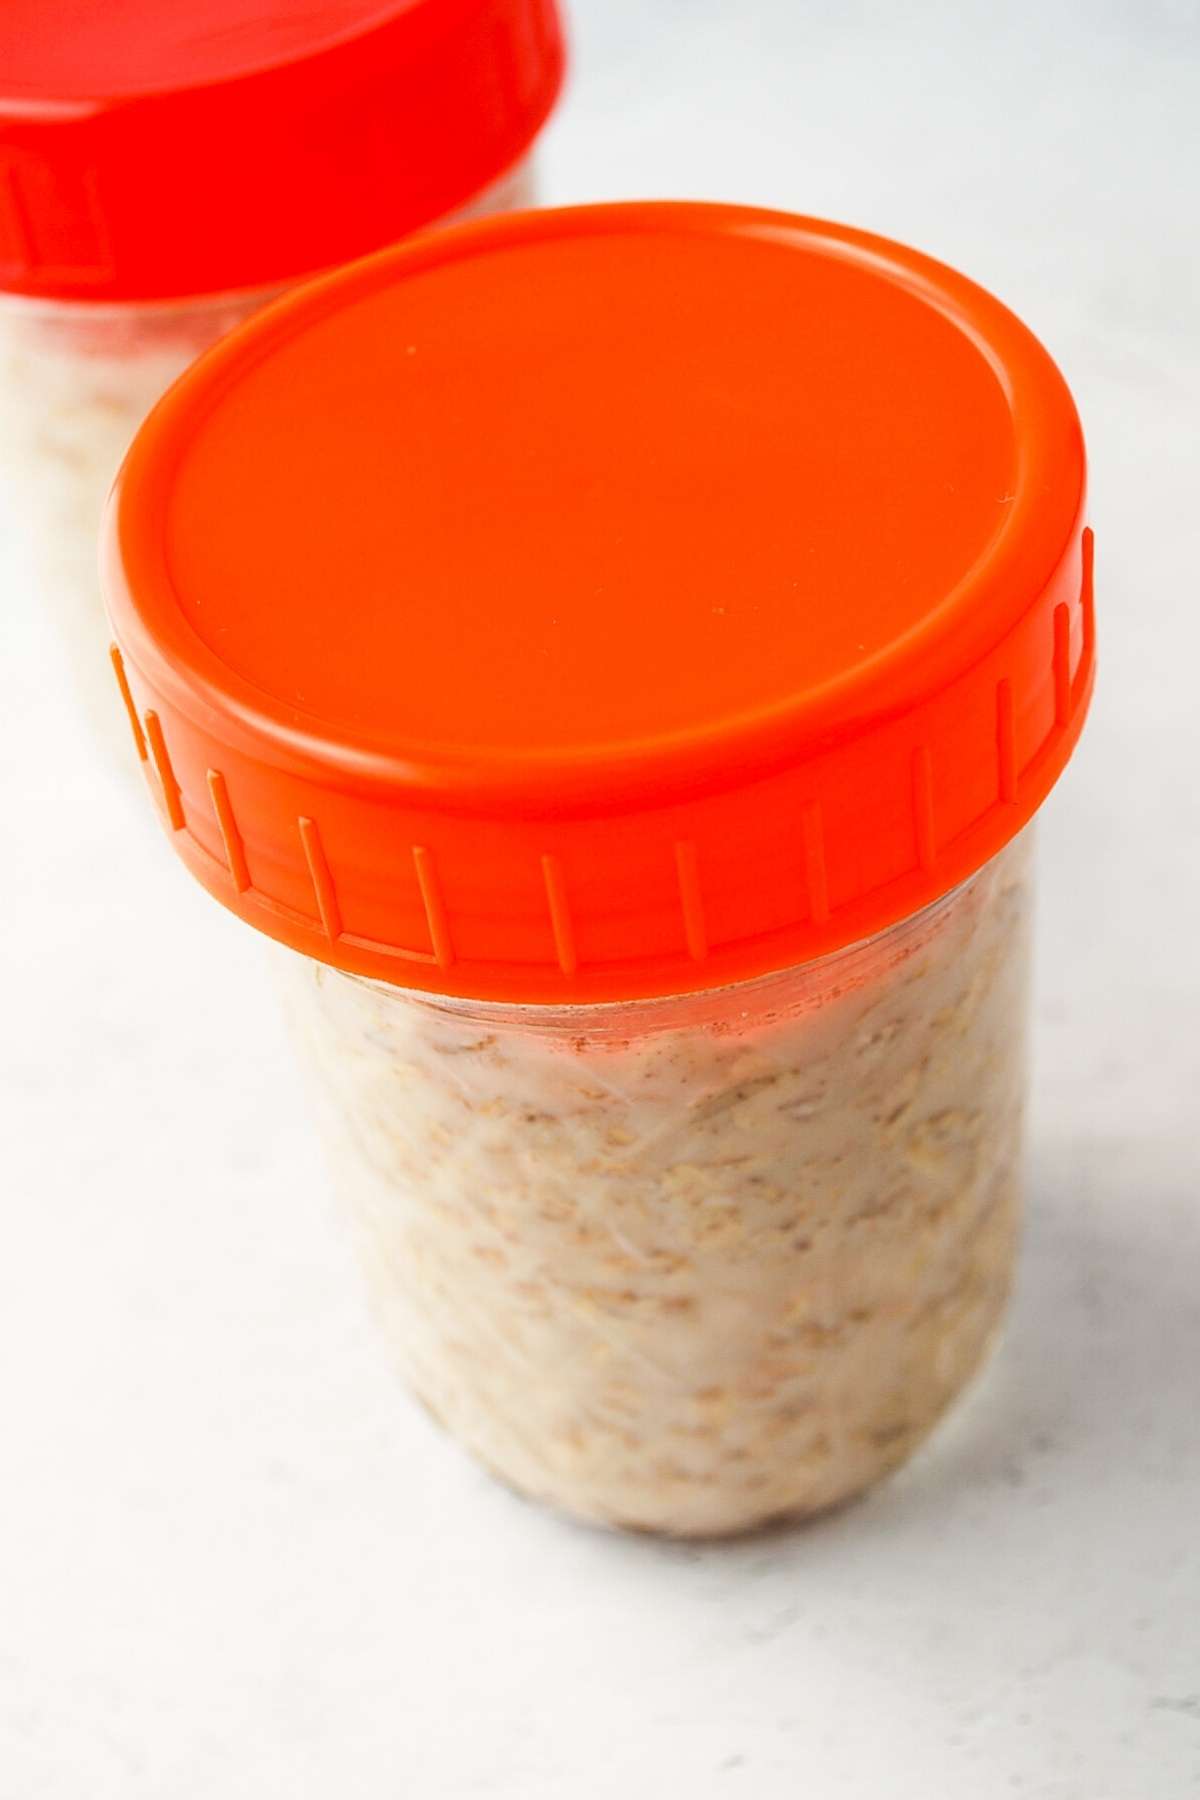 overnight oats in jars with orange lids